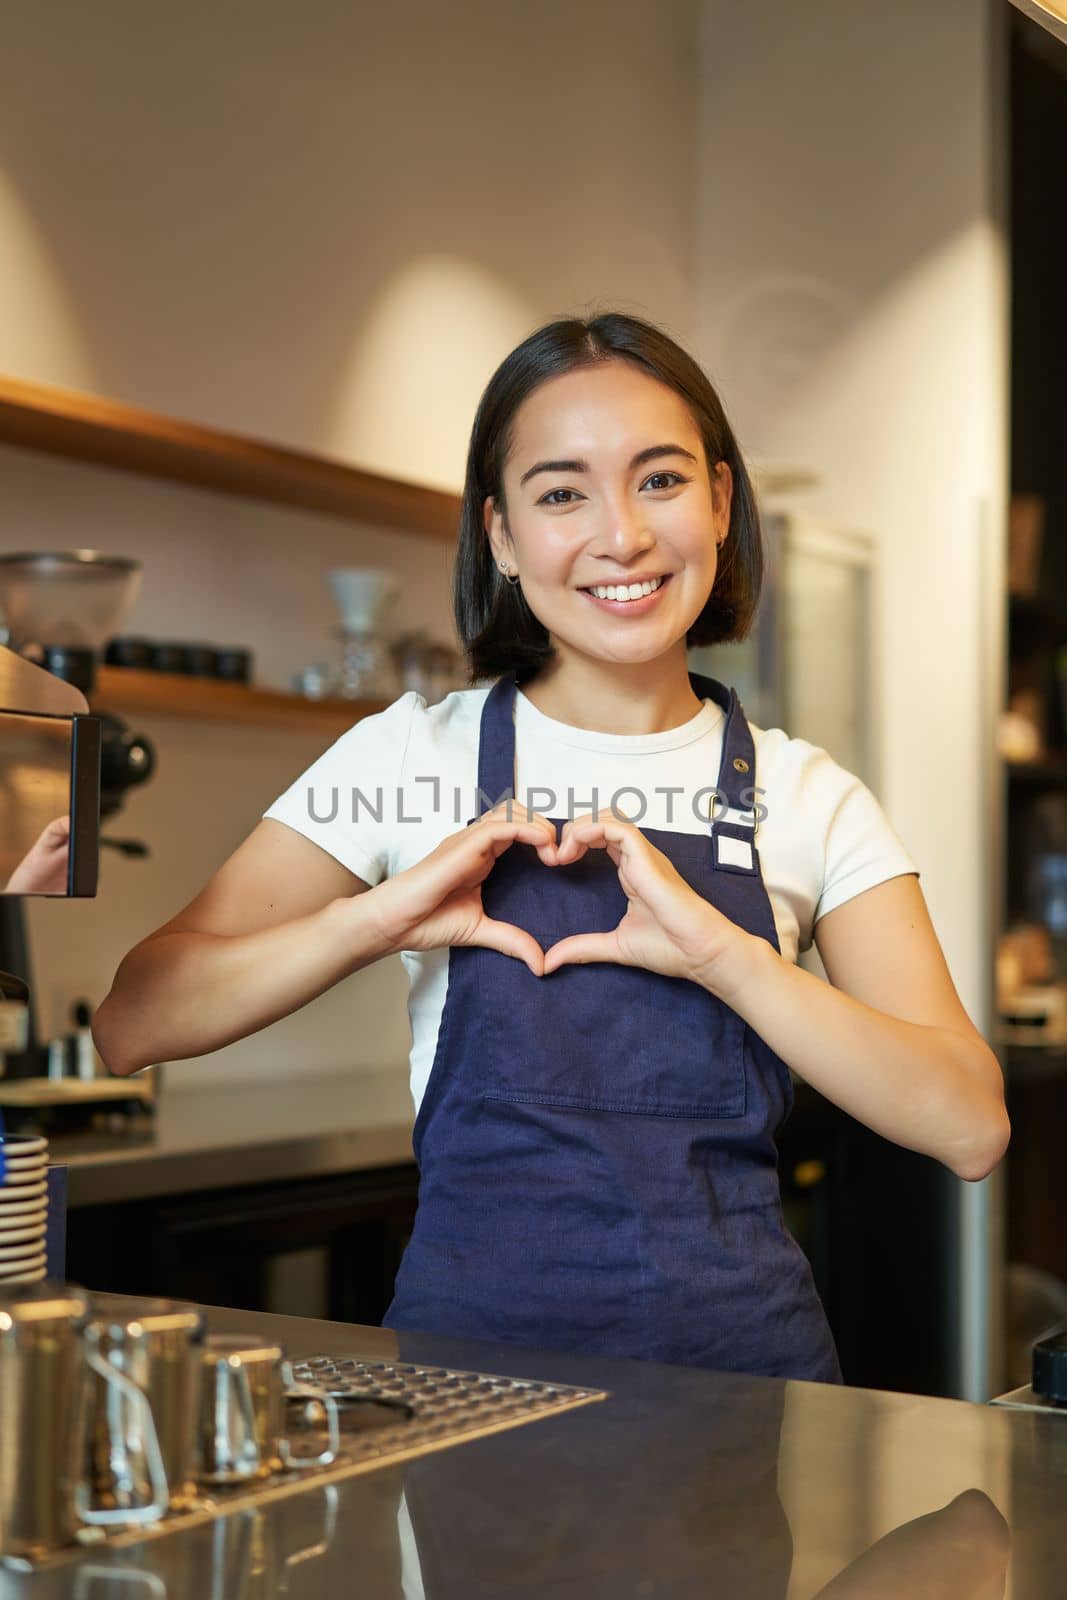 Smiling asian girl barista, shows heart sign, loves making coffee an serving clients, standing in uniform behind counter, work in cafe.